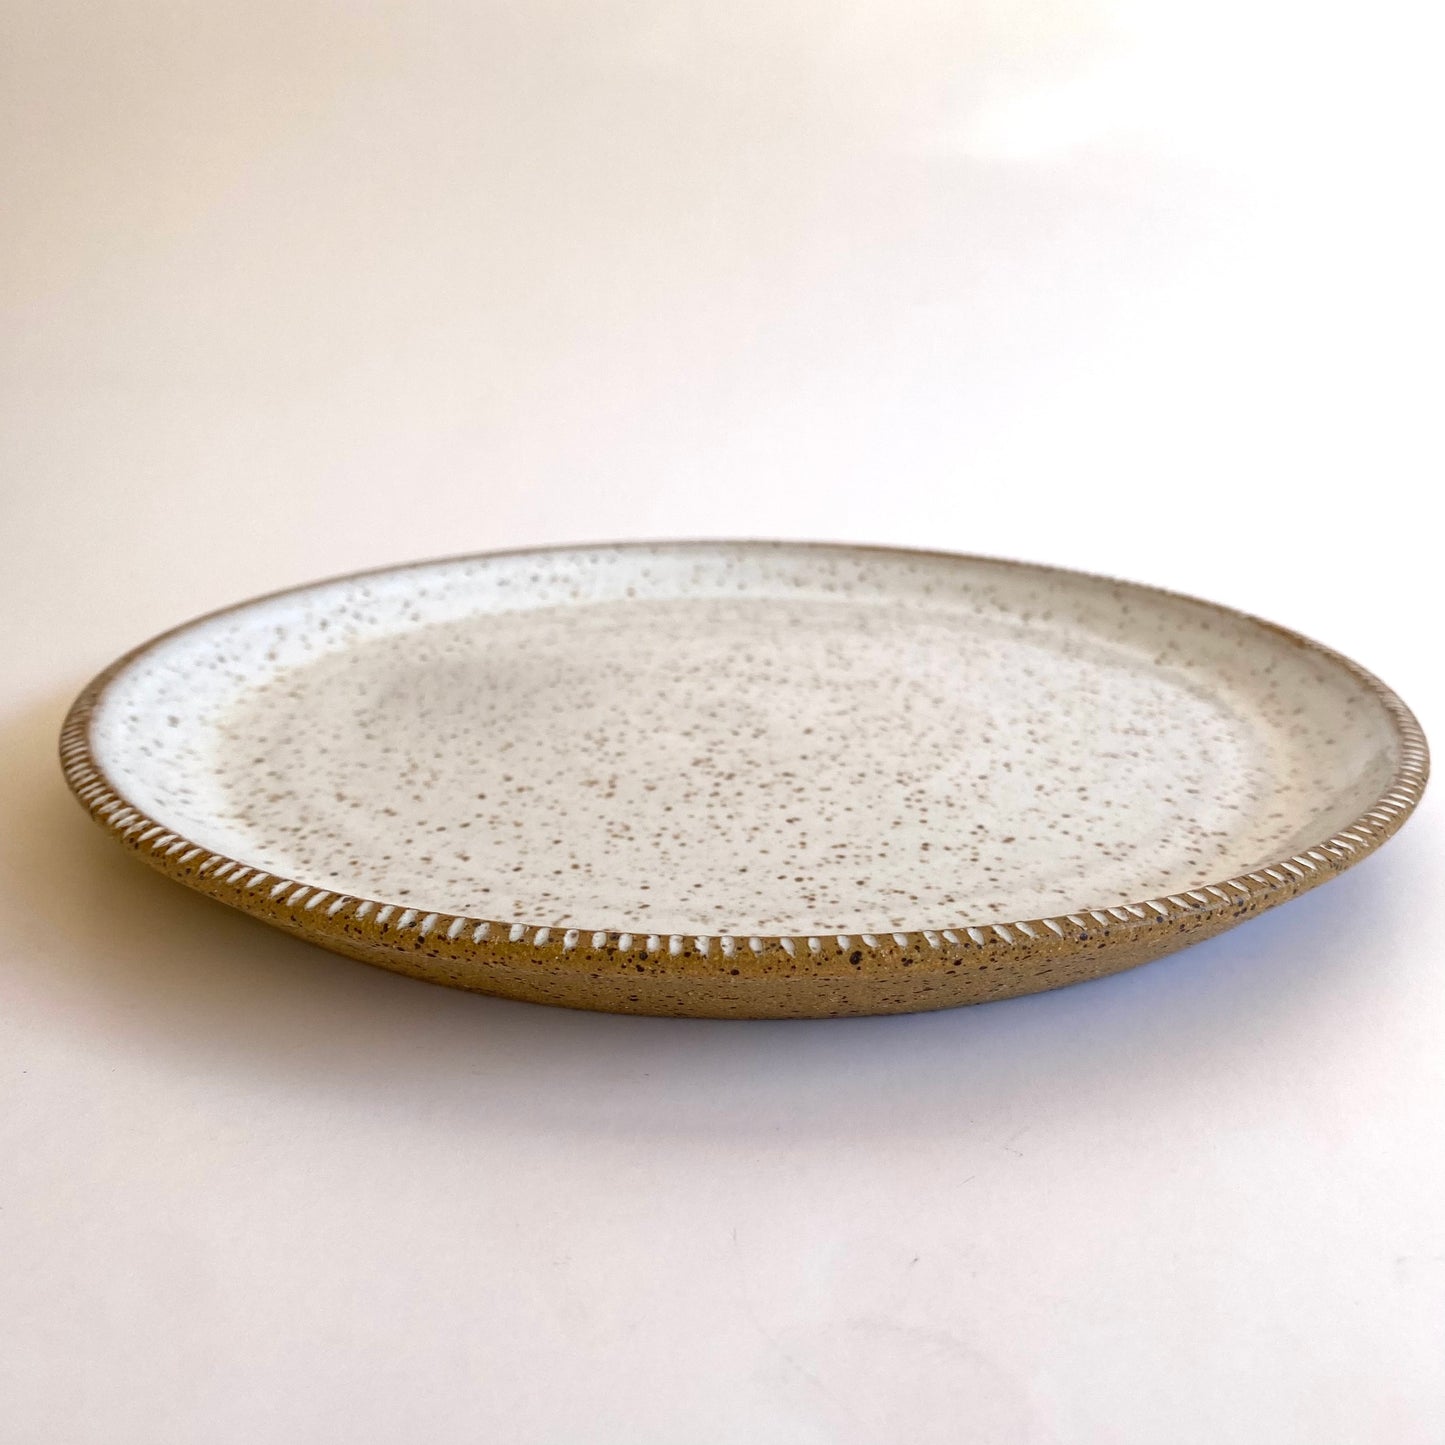 Angled Carved Edge Lunch Plate: White